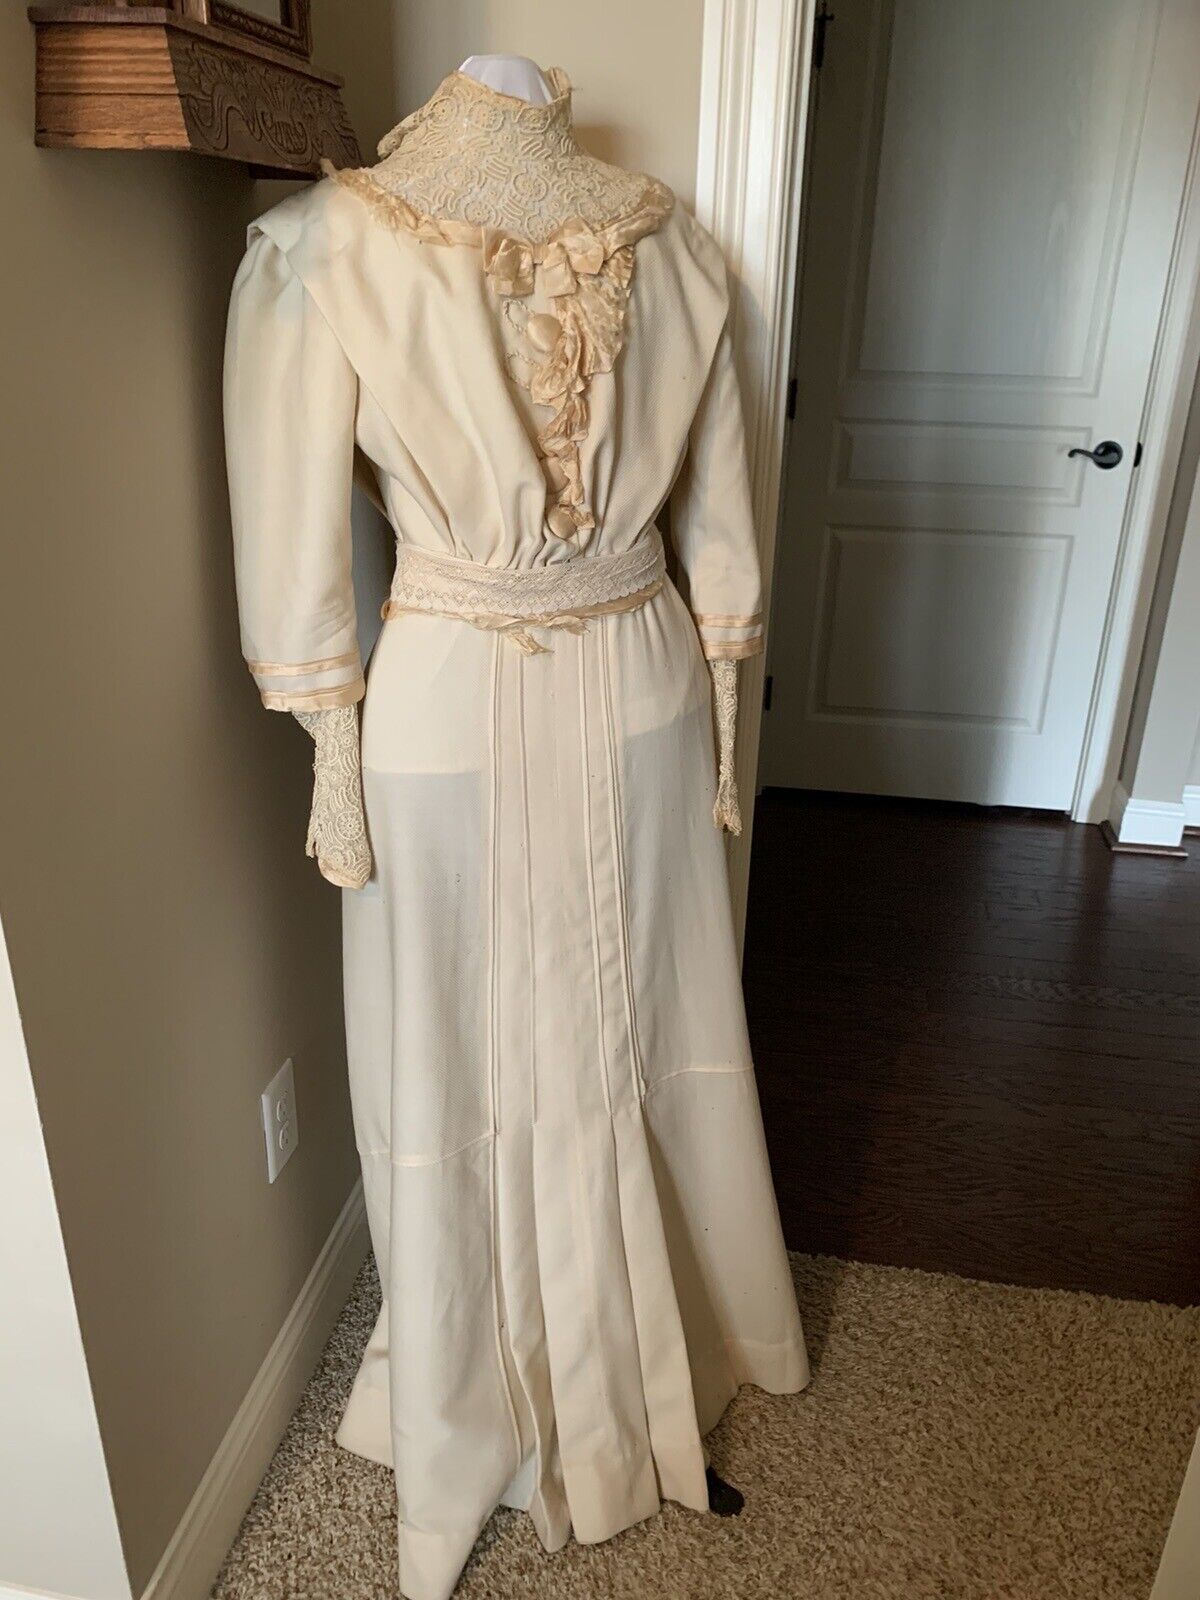 VINTAGE antique dress from probably the 30s.  Complete with hat and shoes